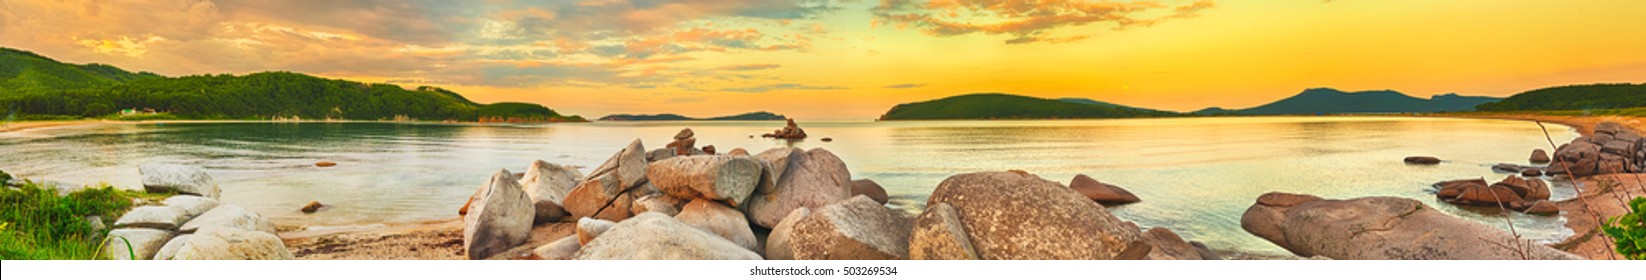 Royalty Free Stones On Beach And Sea Water Stock Images Photos Images, Photos, Reviews